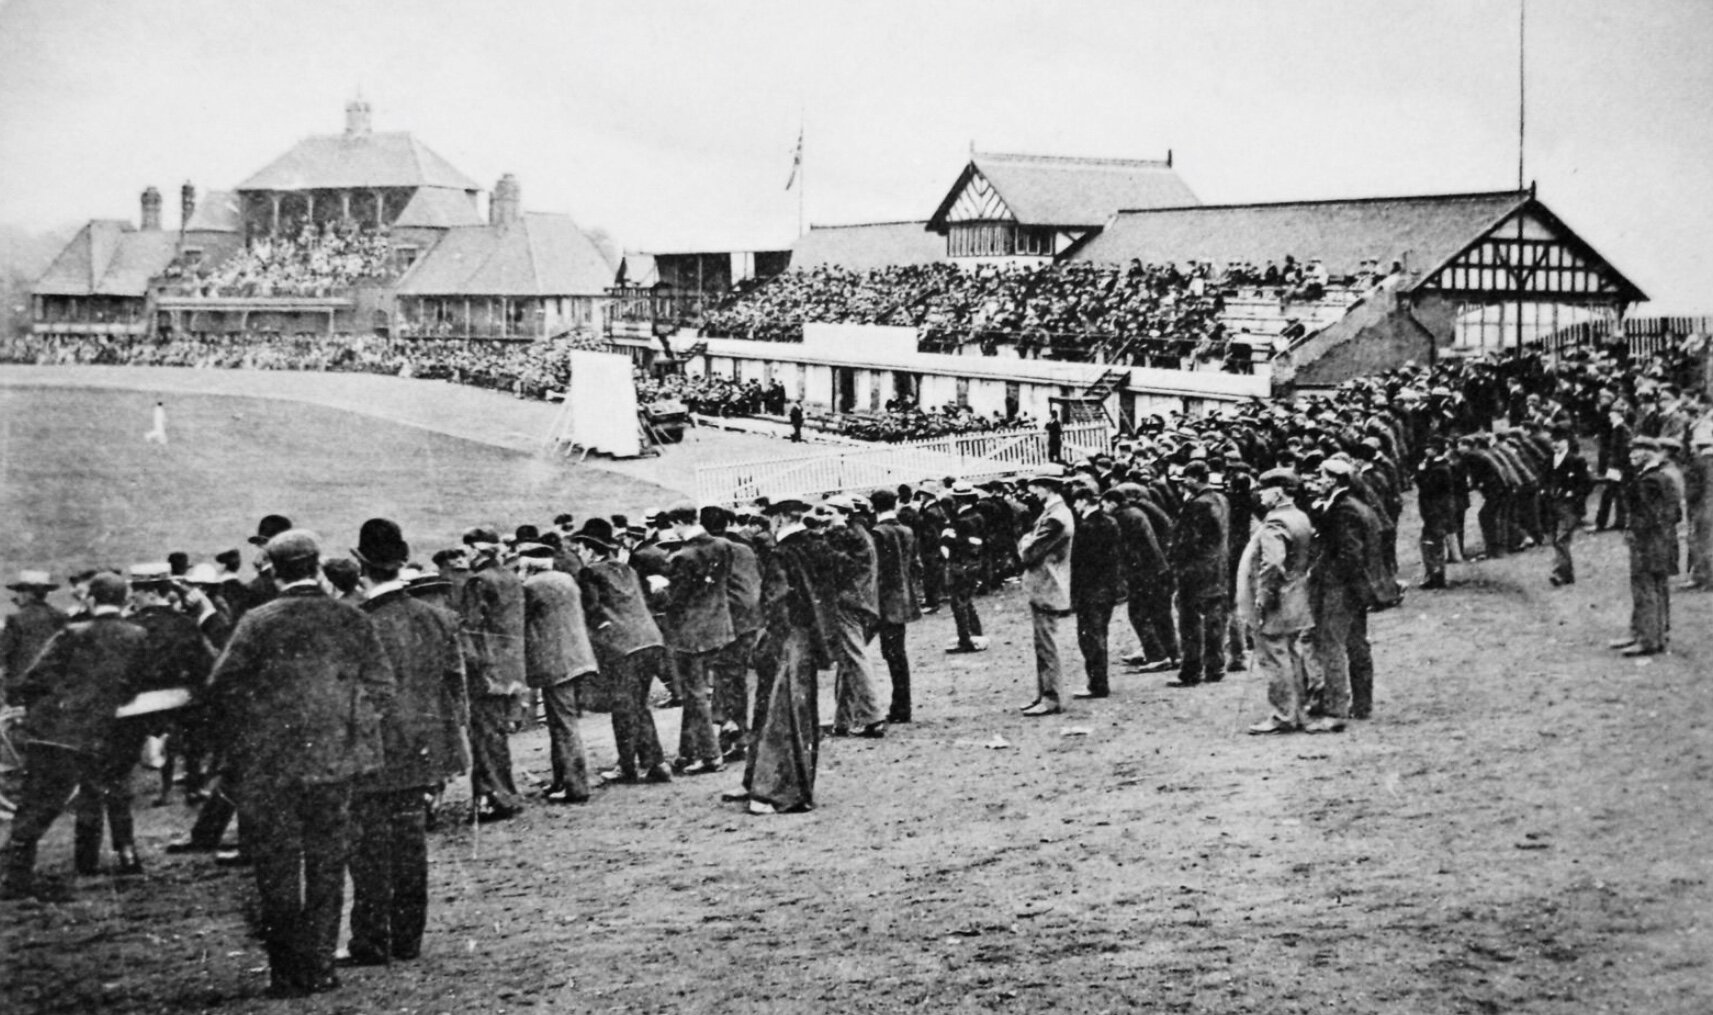 Viewing the Match, Headingley Cricket Ground, 1905